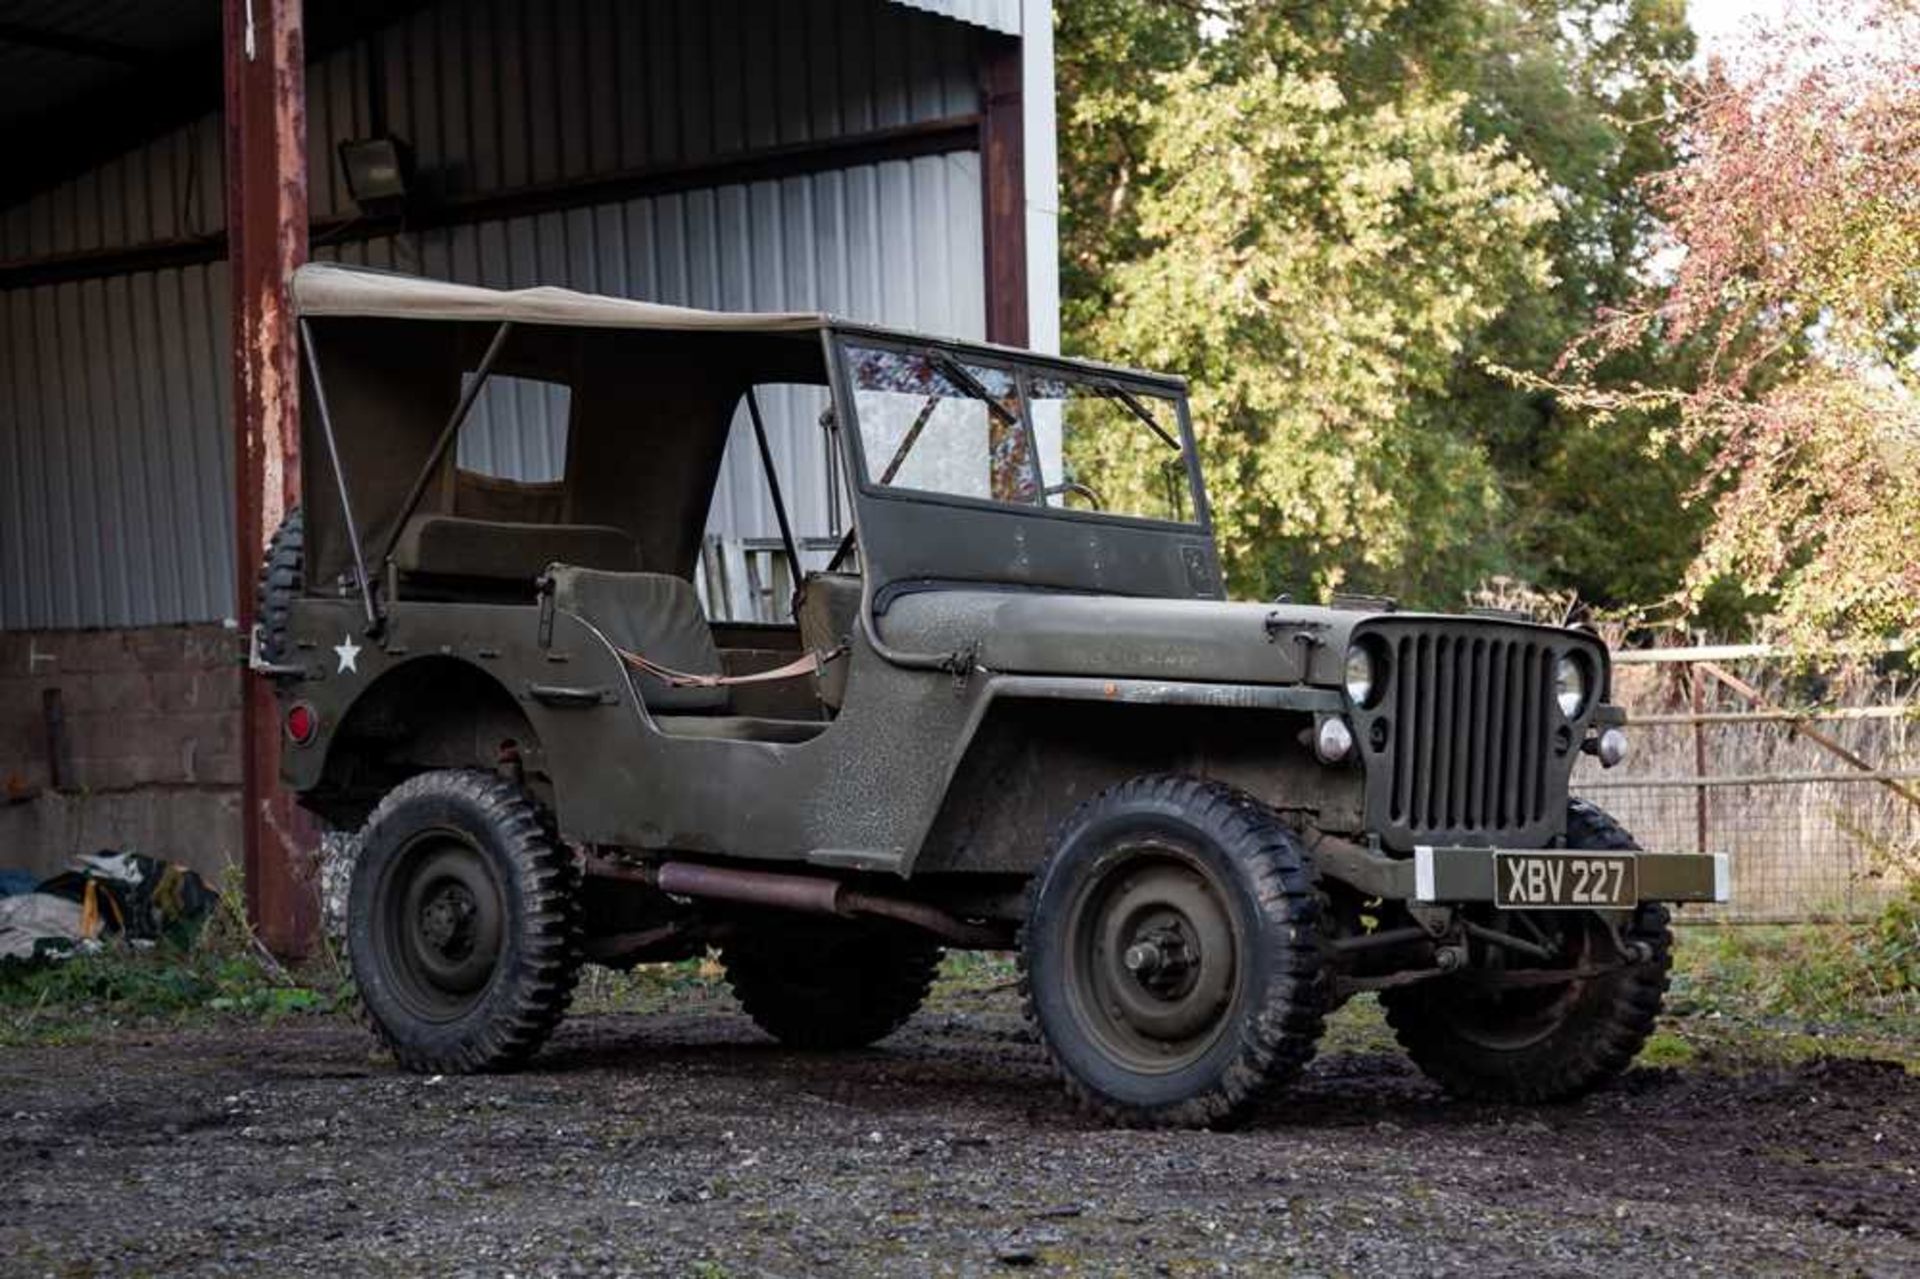 1943 Ford GPW Jeep Formerly the Property of Oscar Winner Rex Harrison - Image 3 of 88